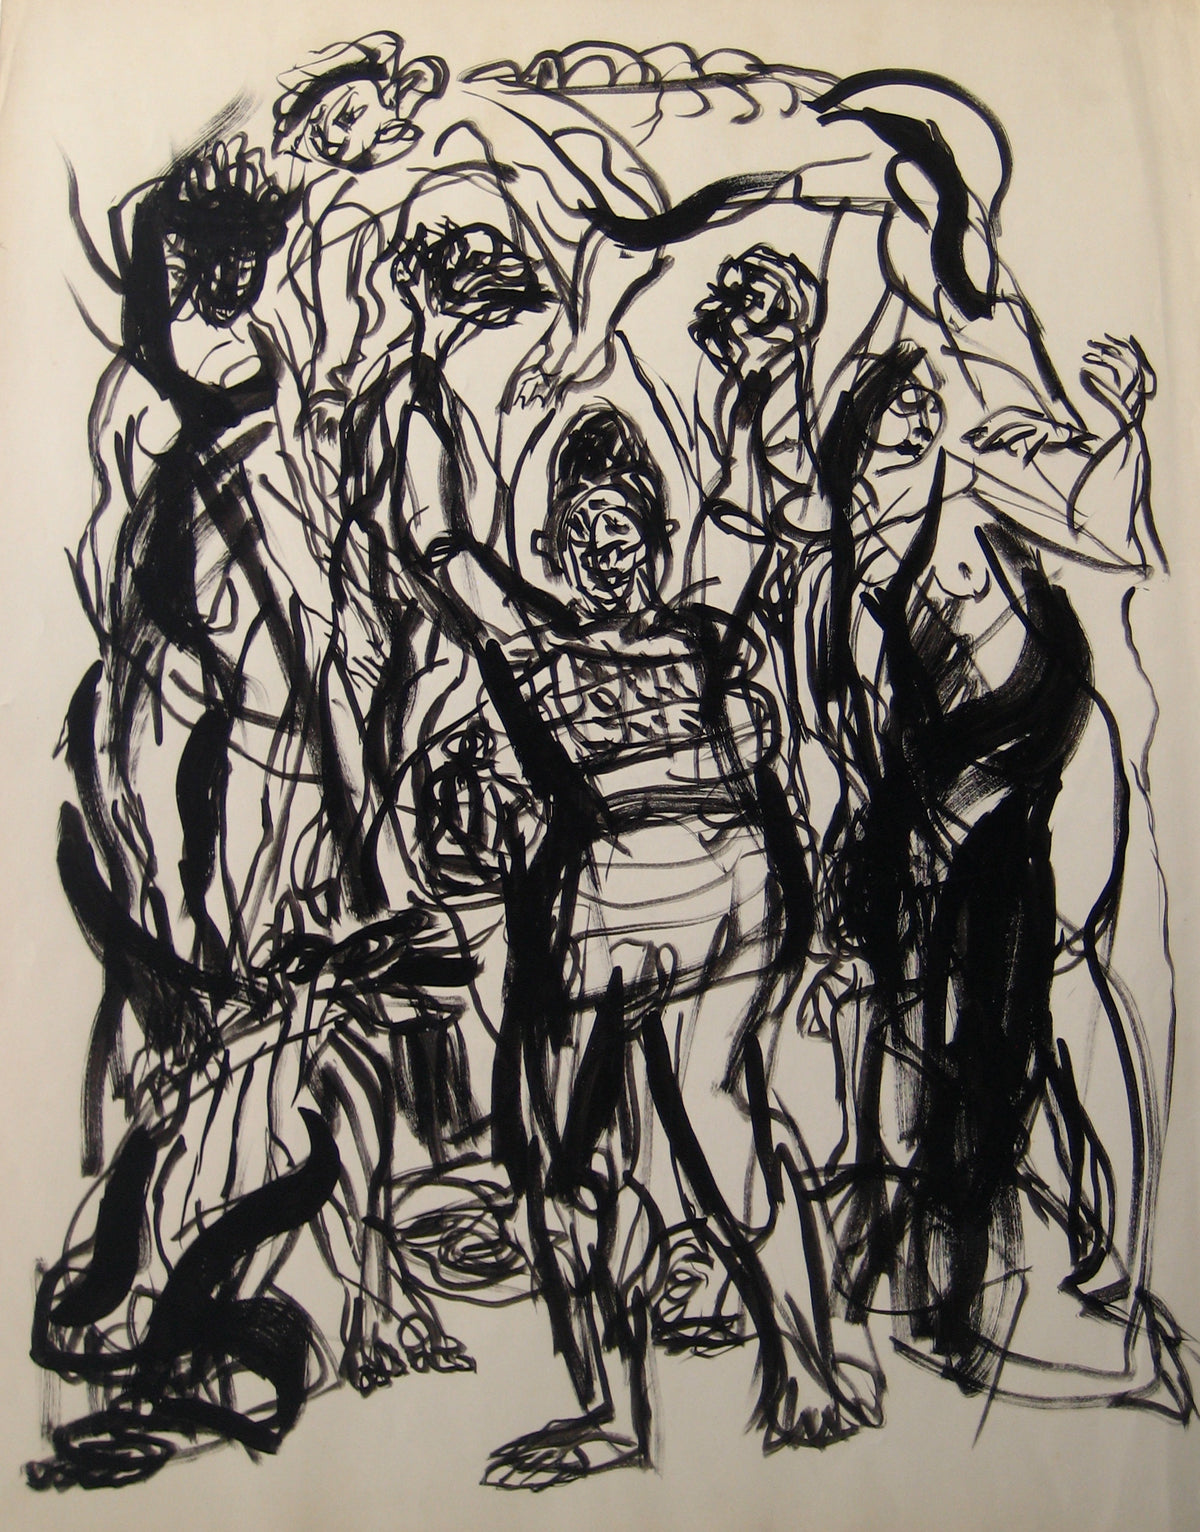 Expressionist Abstracted Figures&lt;br&gt;Early-Mid 20th Century Ink Wash&lt;br&gt;&lt;br&gt;#14352